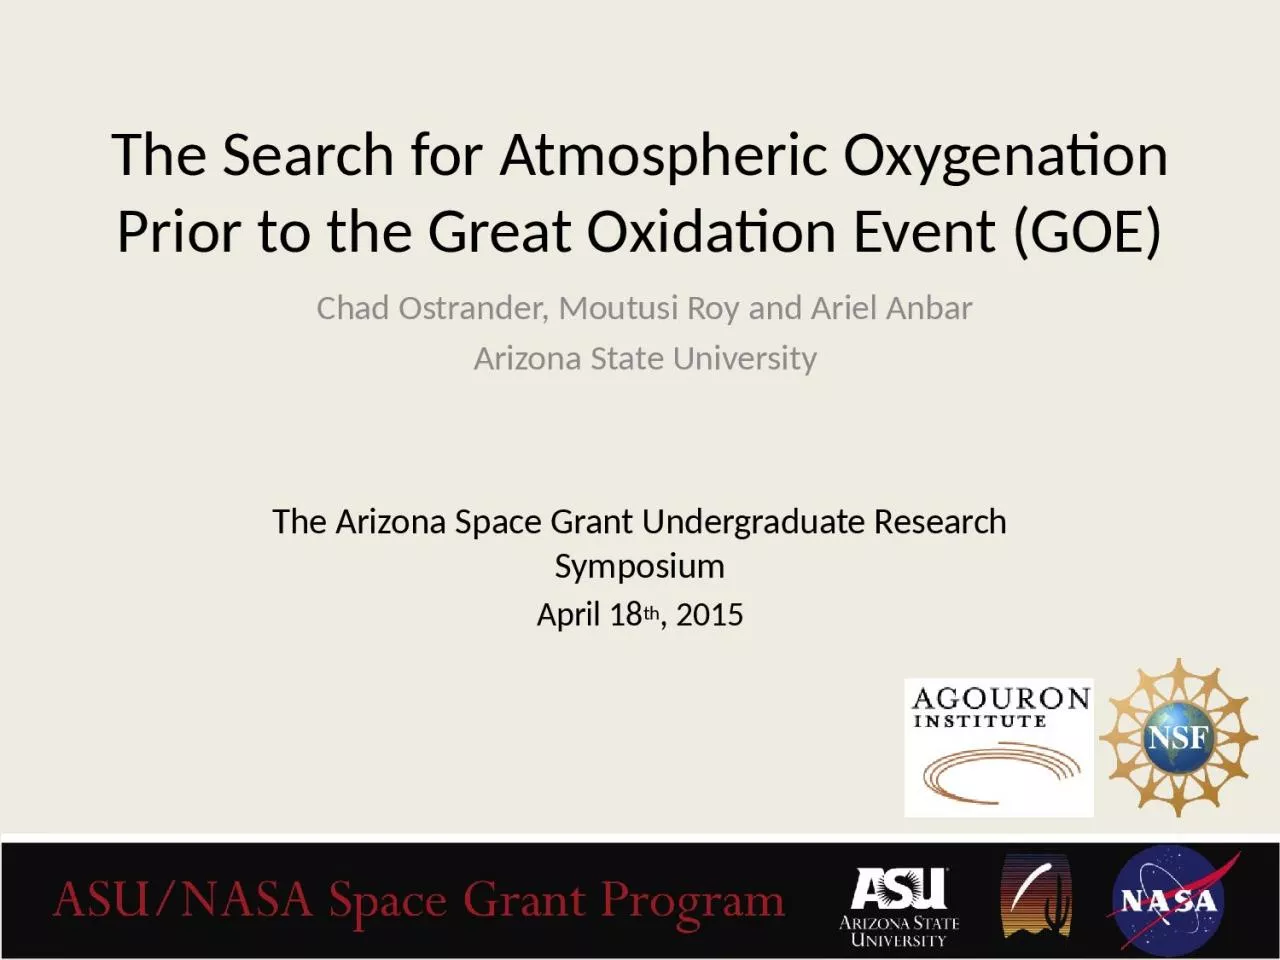 The Search for Atmospheric Oxygenation Prior to the Great Oxidation